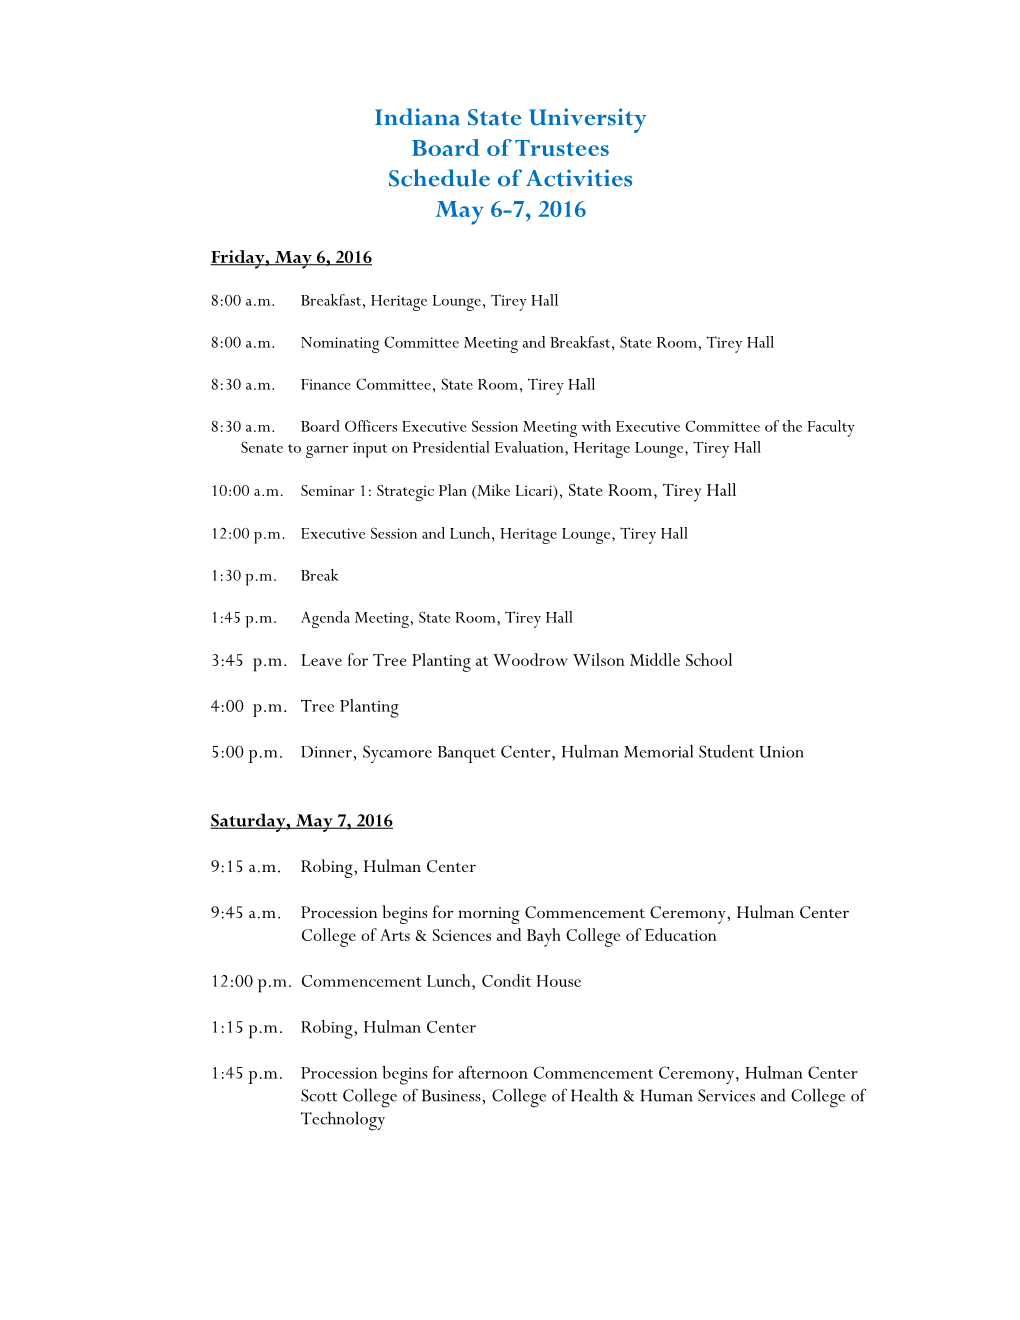 Indiana State University Board of Trustees Schedule of Activities May 6-7, 2016